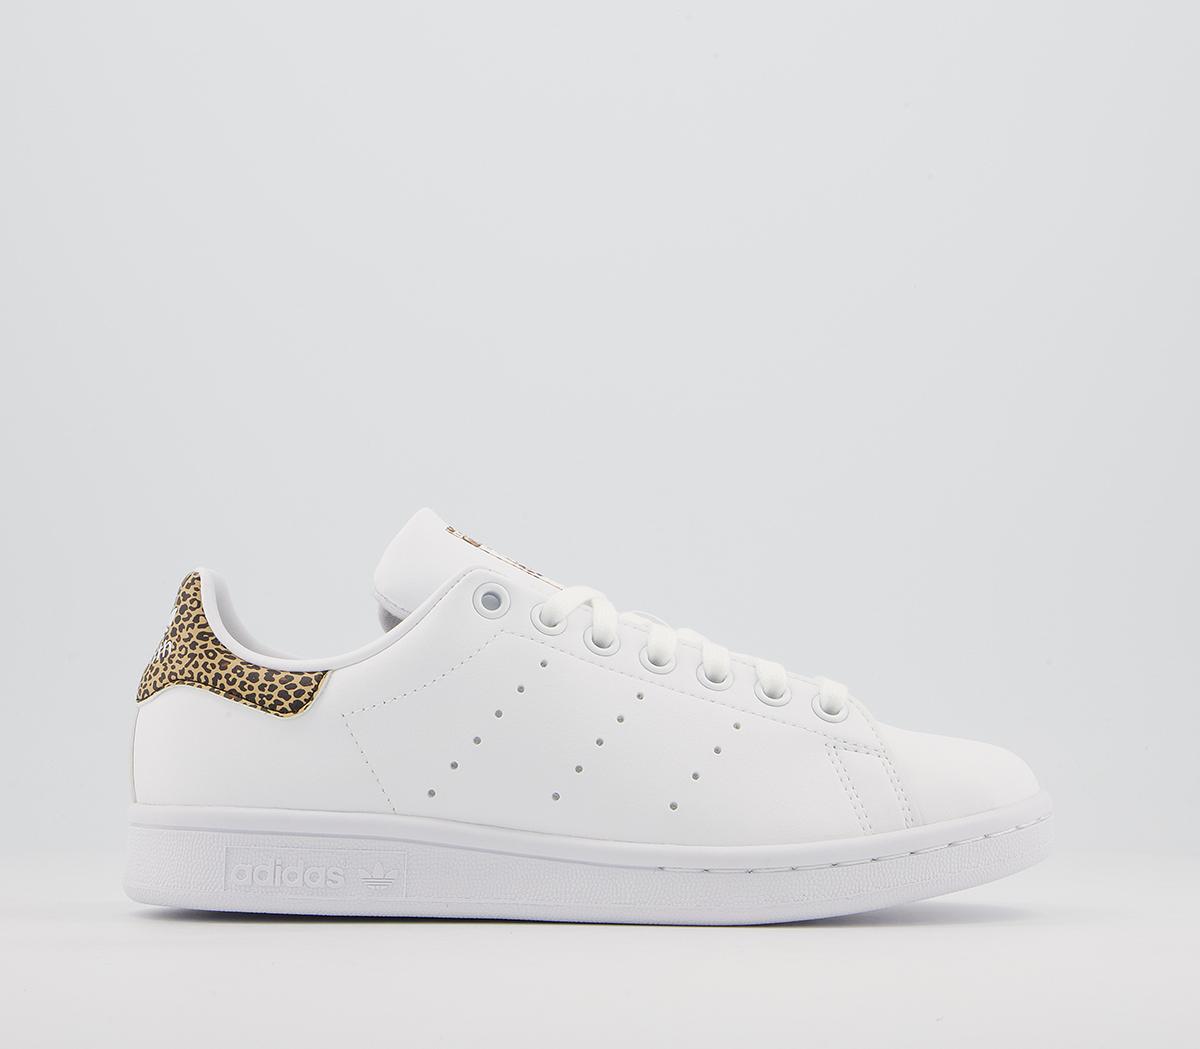 artillería Volcánico Planificado adidas Stan Smith Trainers White Leopard Exclusive - Women's Trainers